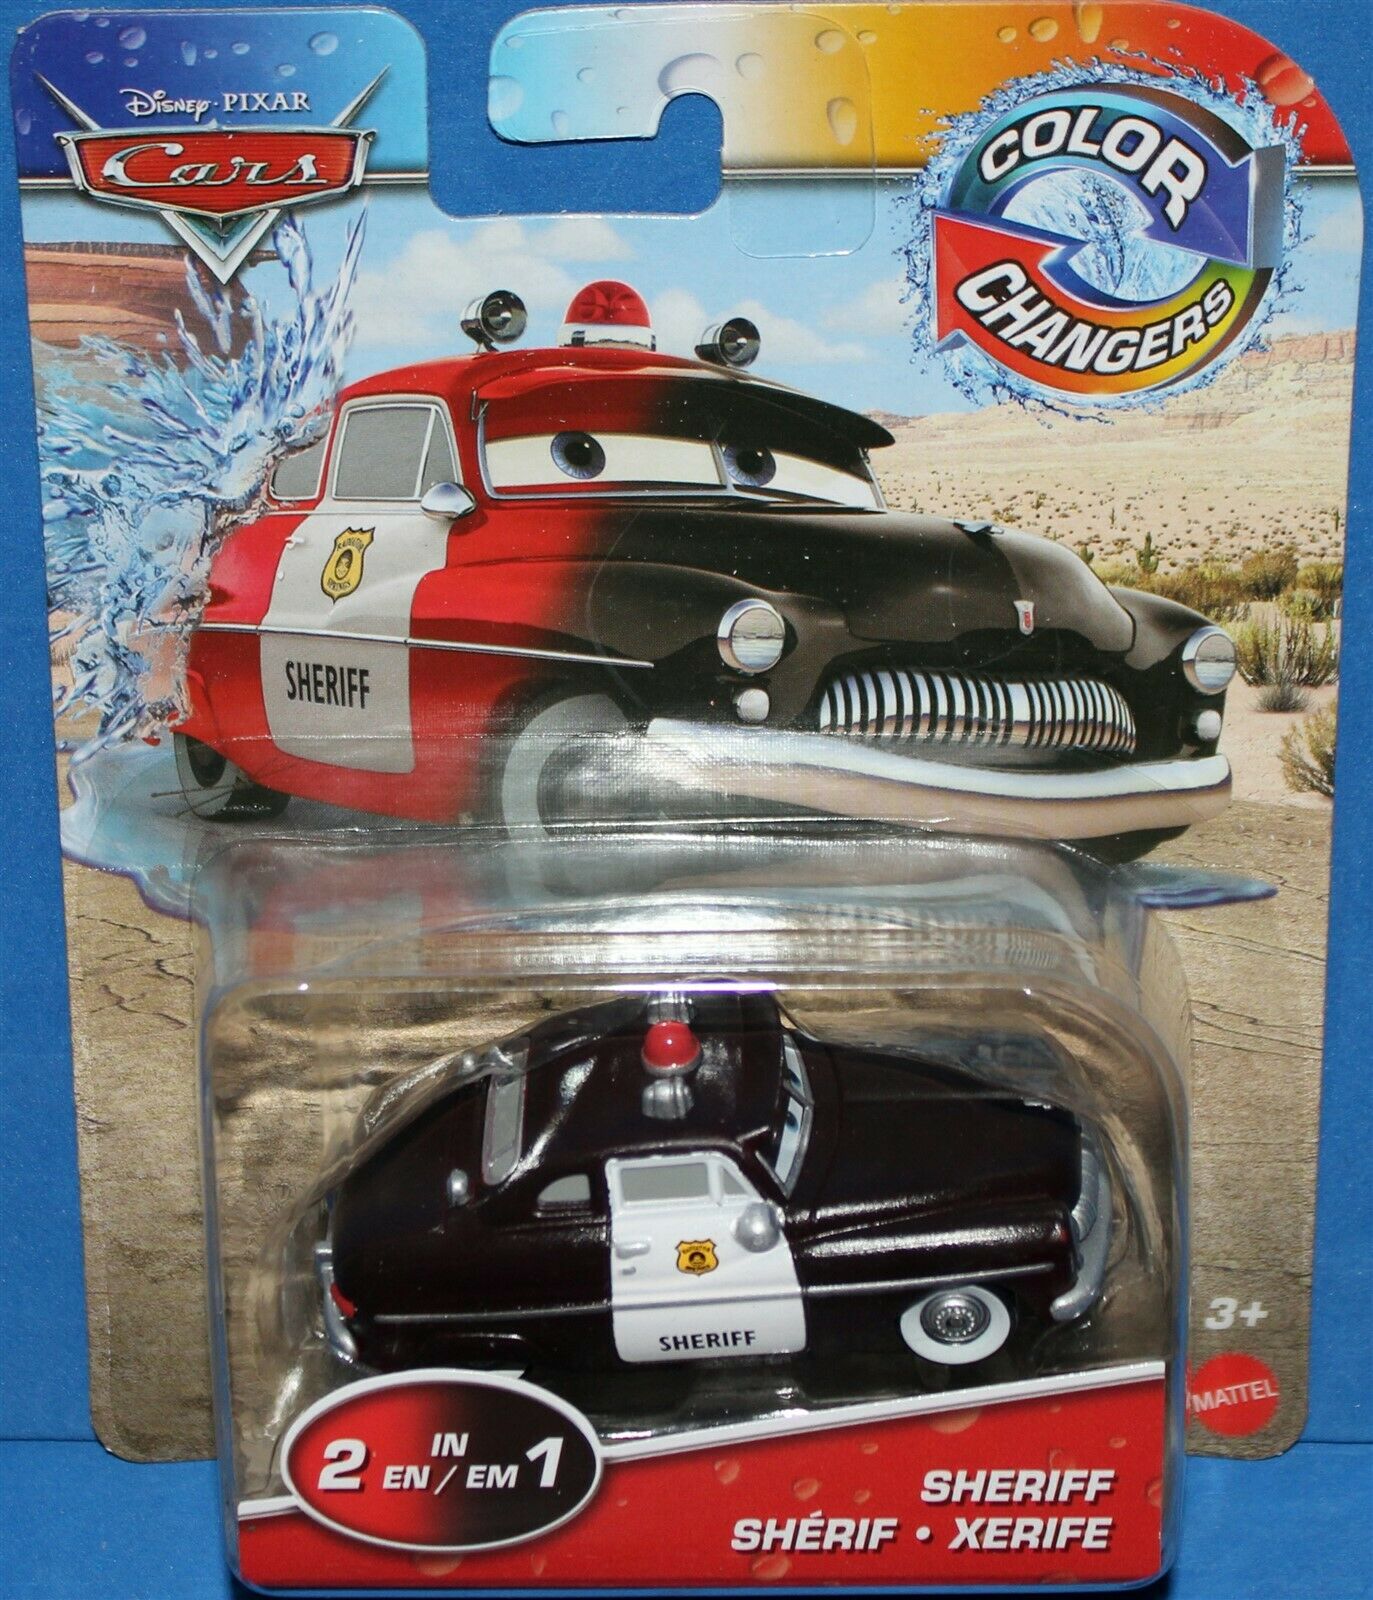 Disney Pixar Cars 1/55th New Color Changers - Sheriff